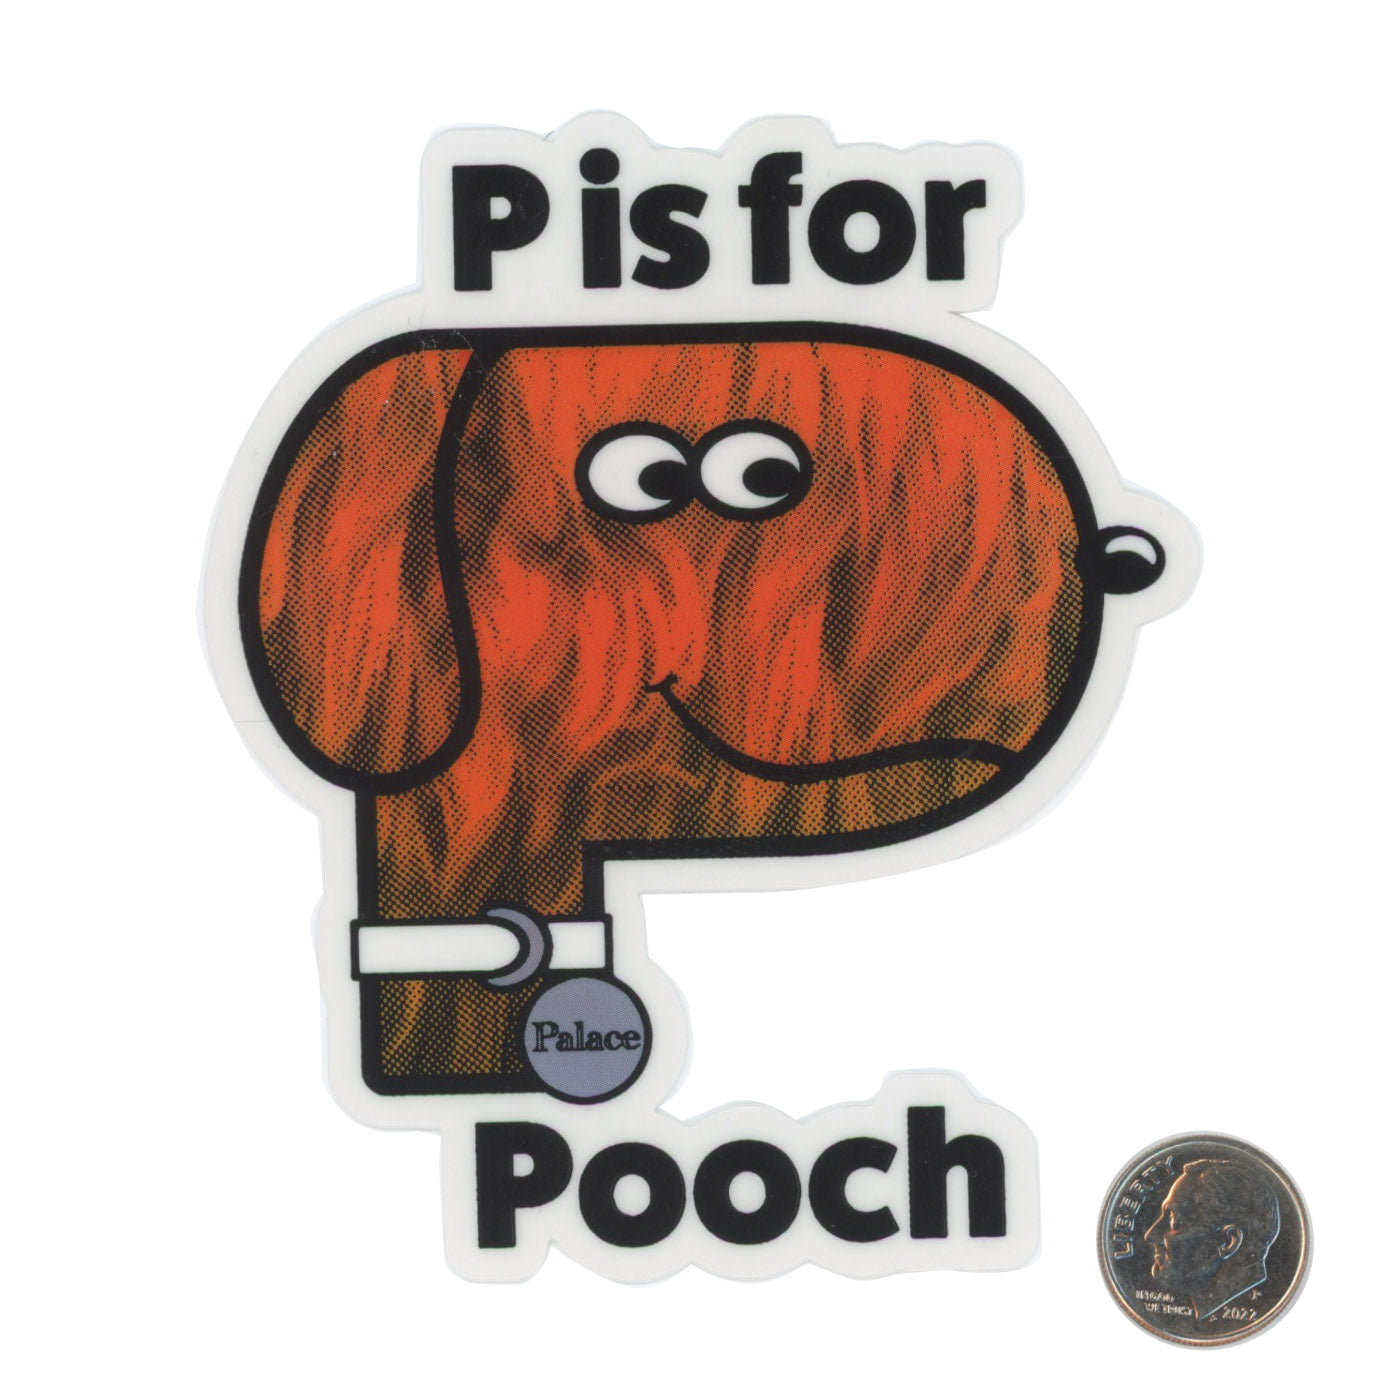 The Palace P is for Pooch Sticker with dime